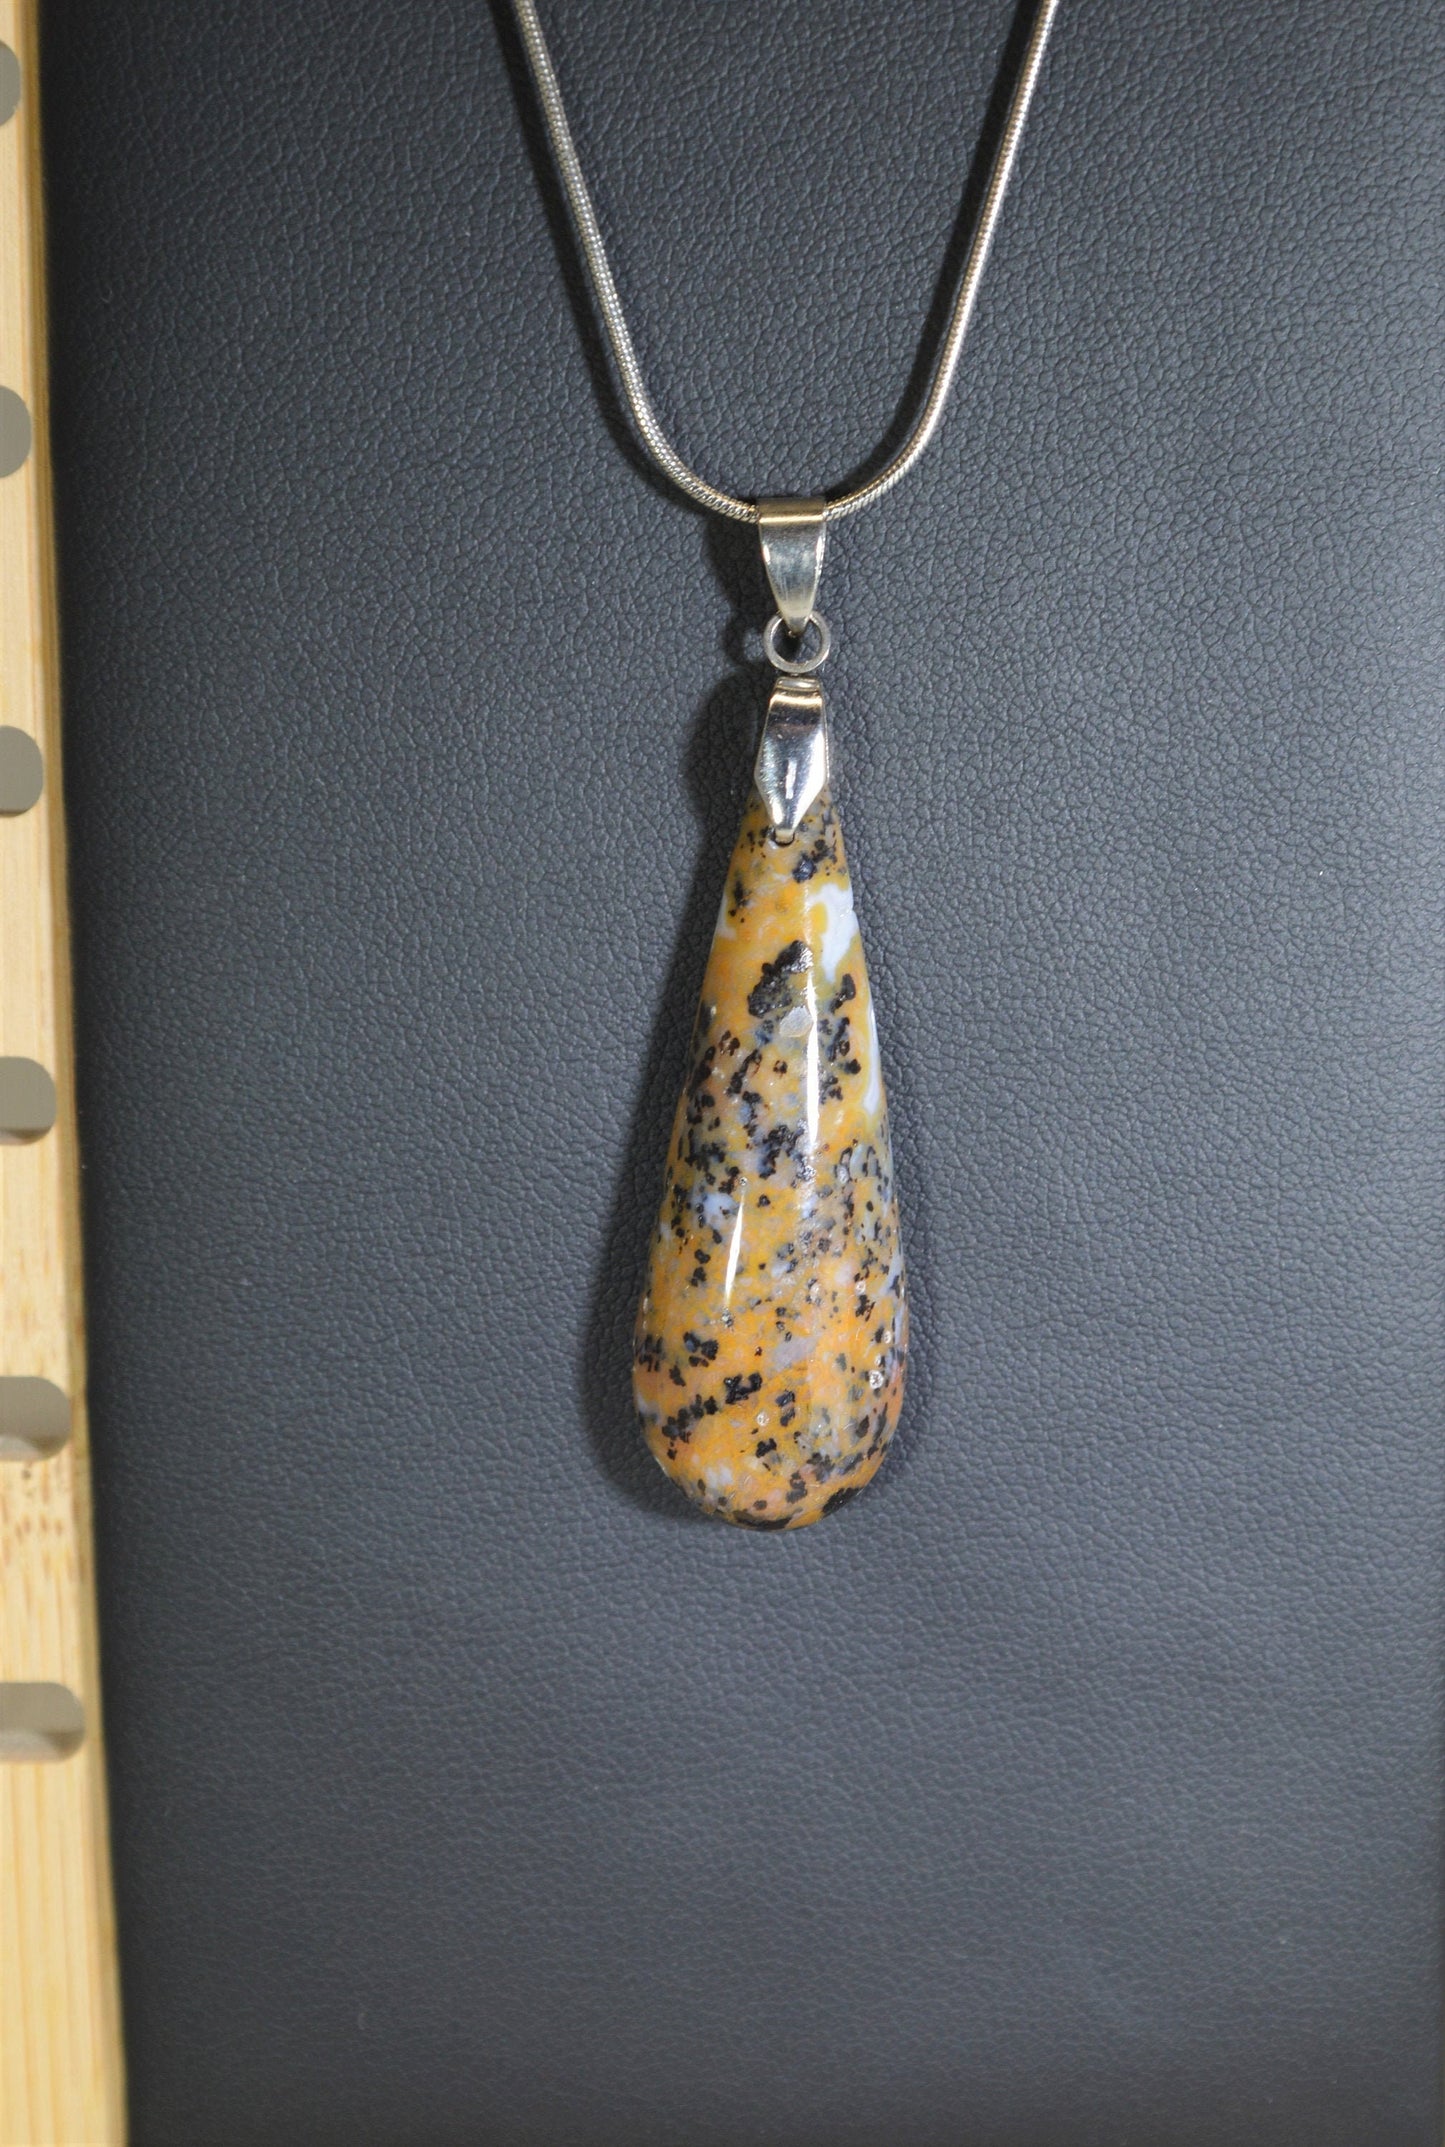 Agate Necklace, Cheetah Agate Necklace, Leopard Print Stone, Cheetah Agate Jewelry, Animal Print Necklace, W/O